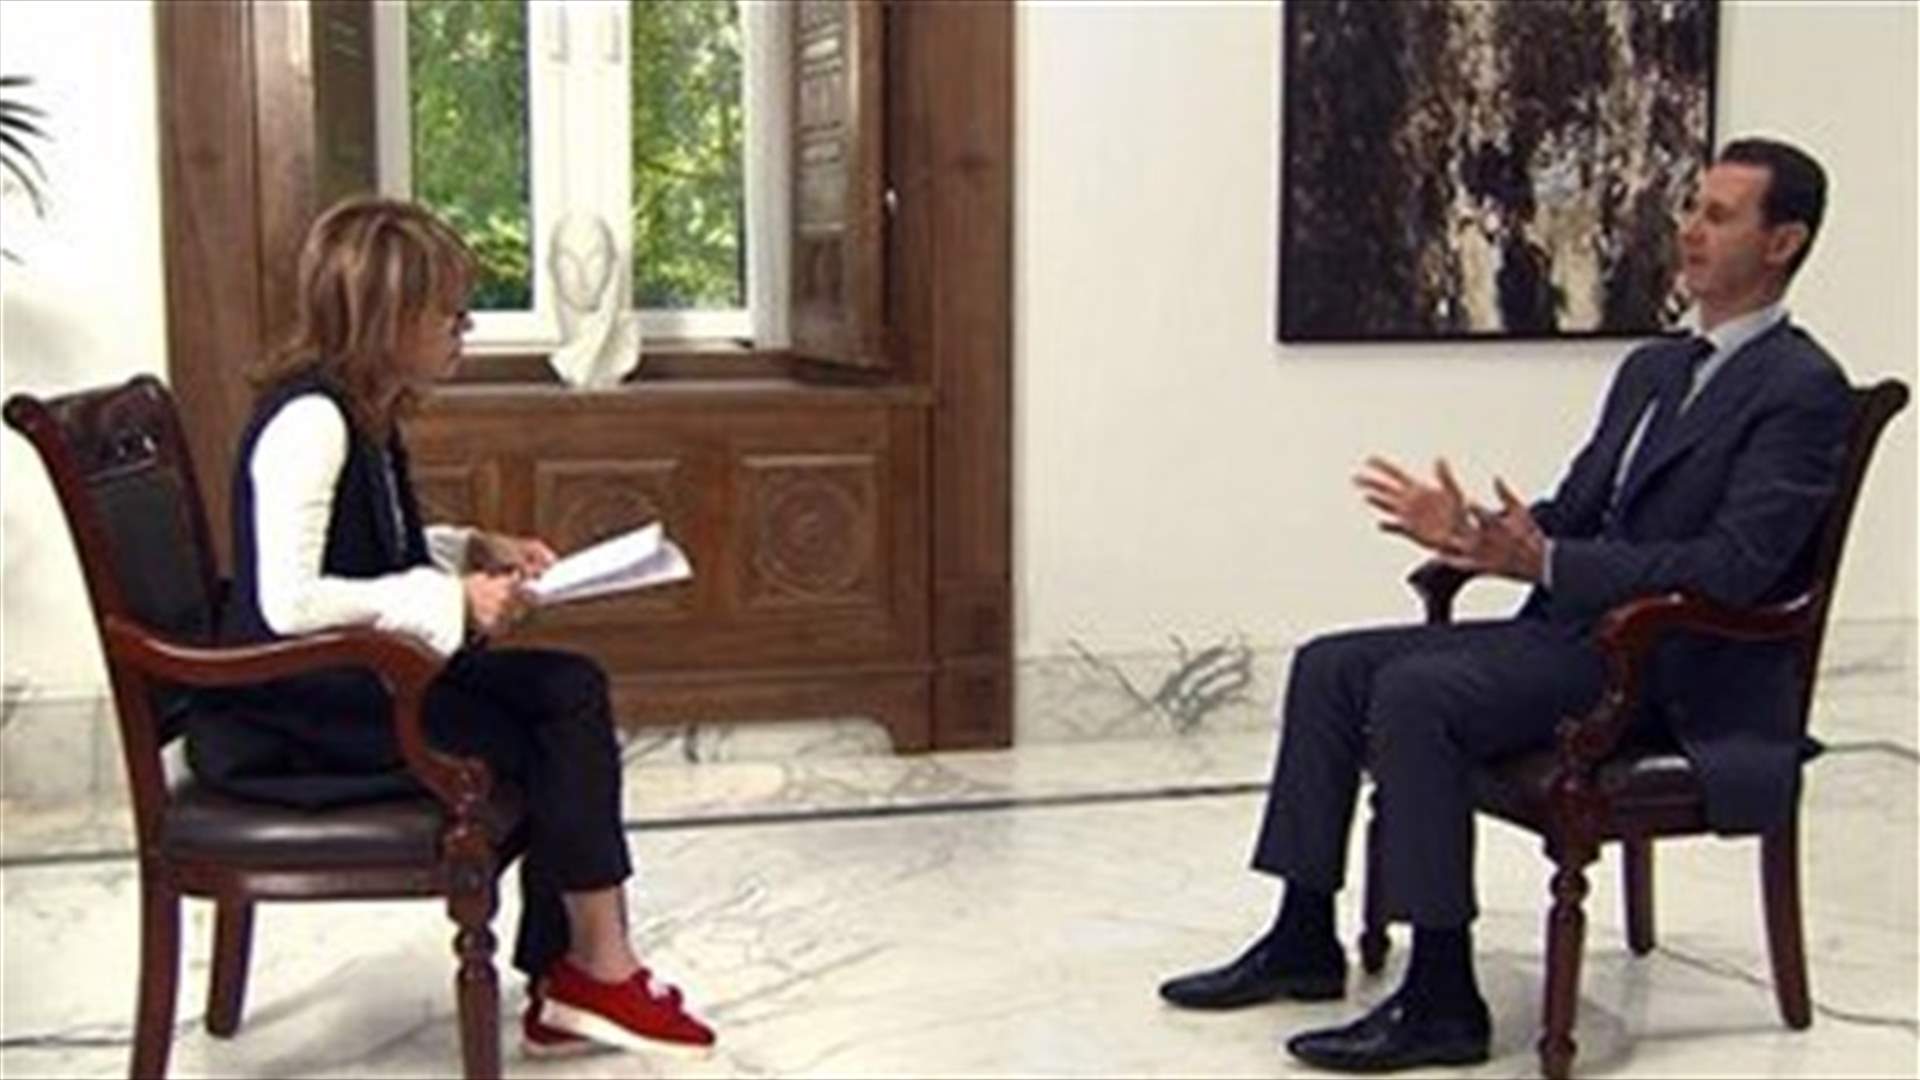 Syria&#39;s Assad denies Russia makes decisions for him - interview